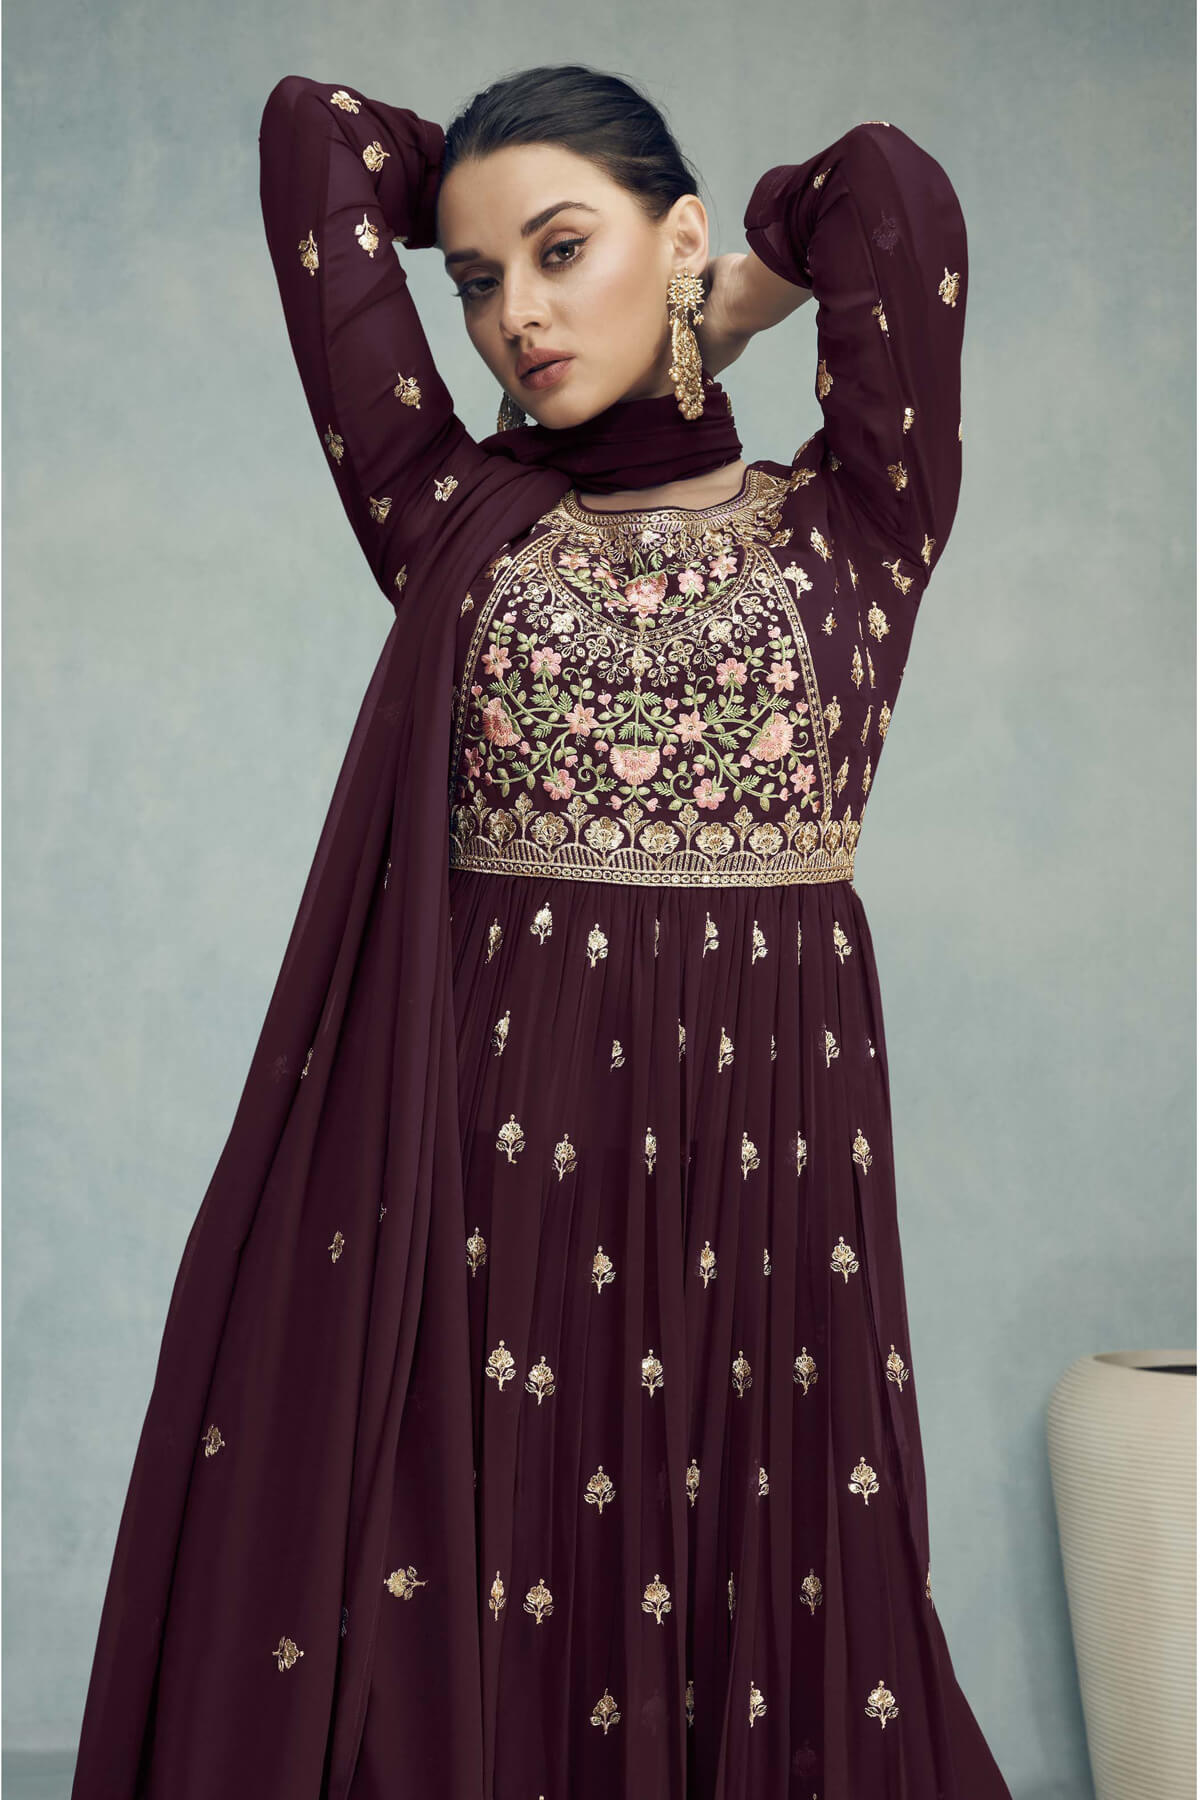 Festive Collection Embroidered Palazzo Suits online in Canada USA UK Australia New Zealand France Mauritius